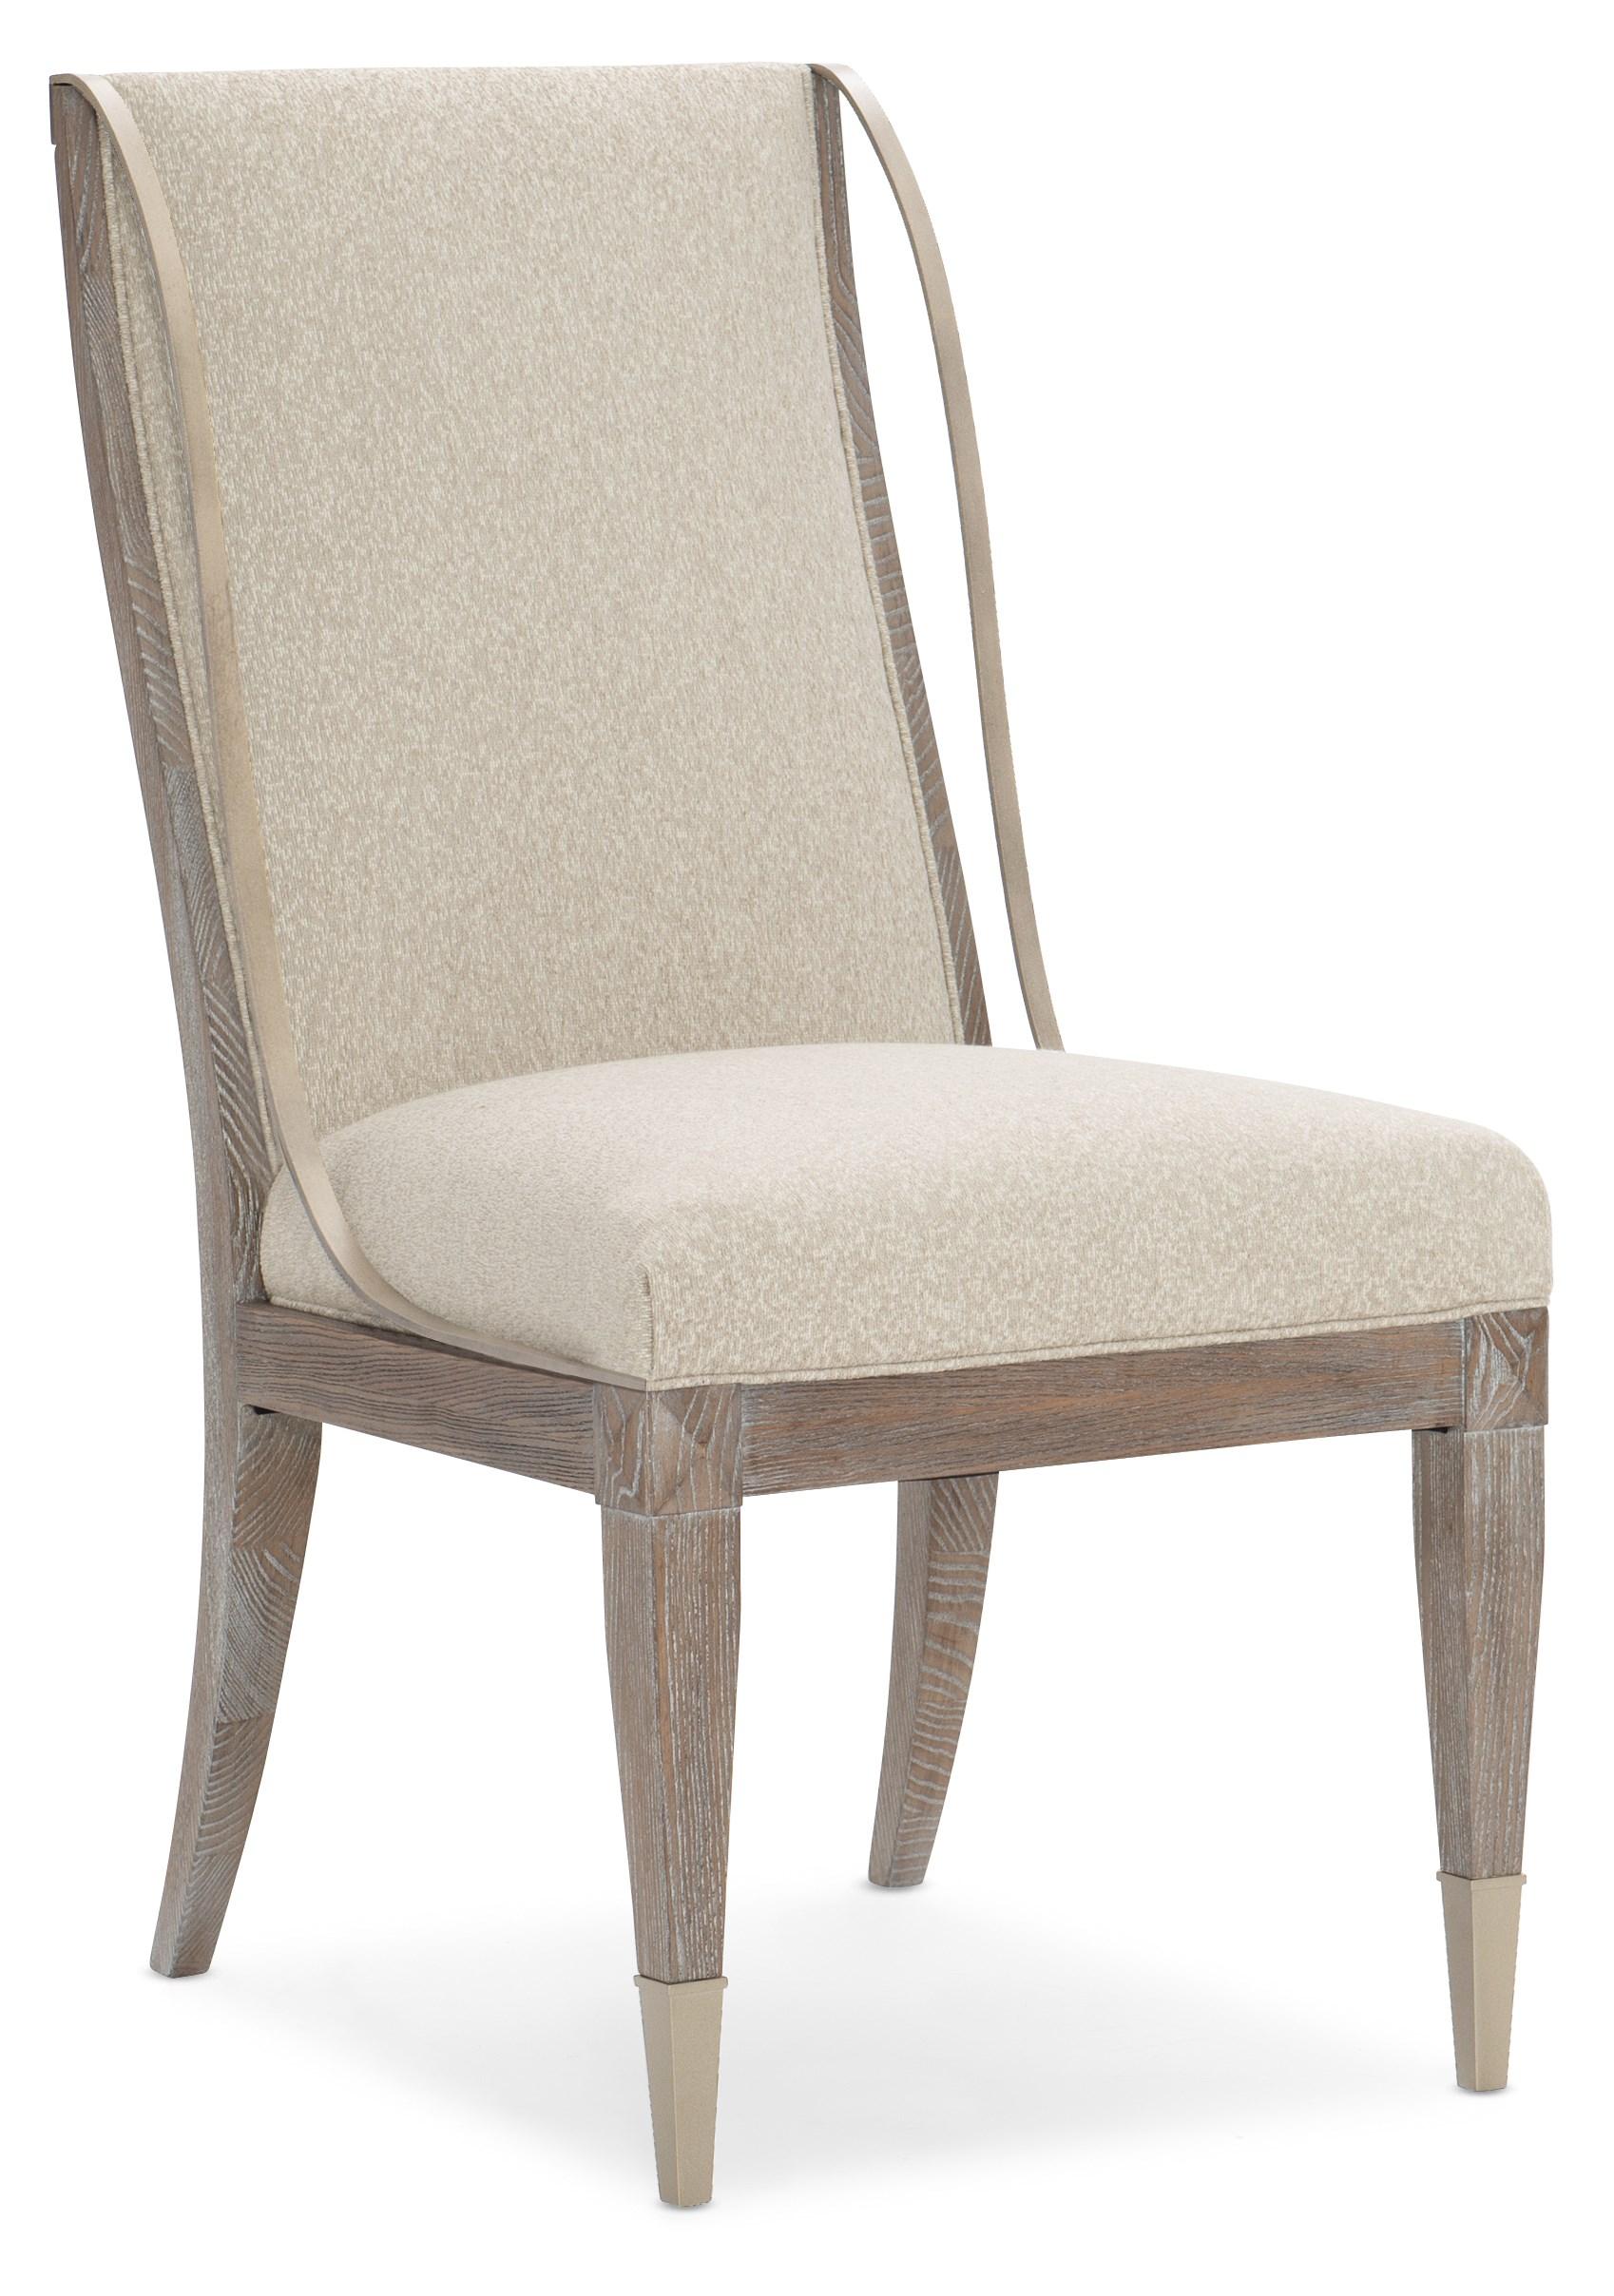 Classic Dining Chair Set OPEN ARMS SIDE CHAIR CLA-019-283-Set-2 in Light Gray, Driftwood Fabric